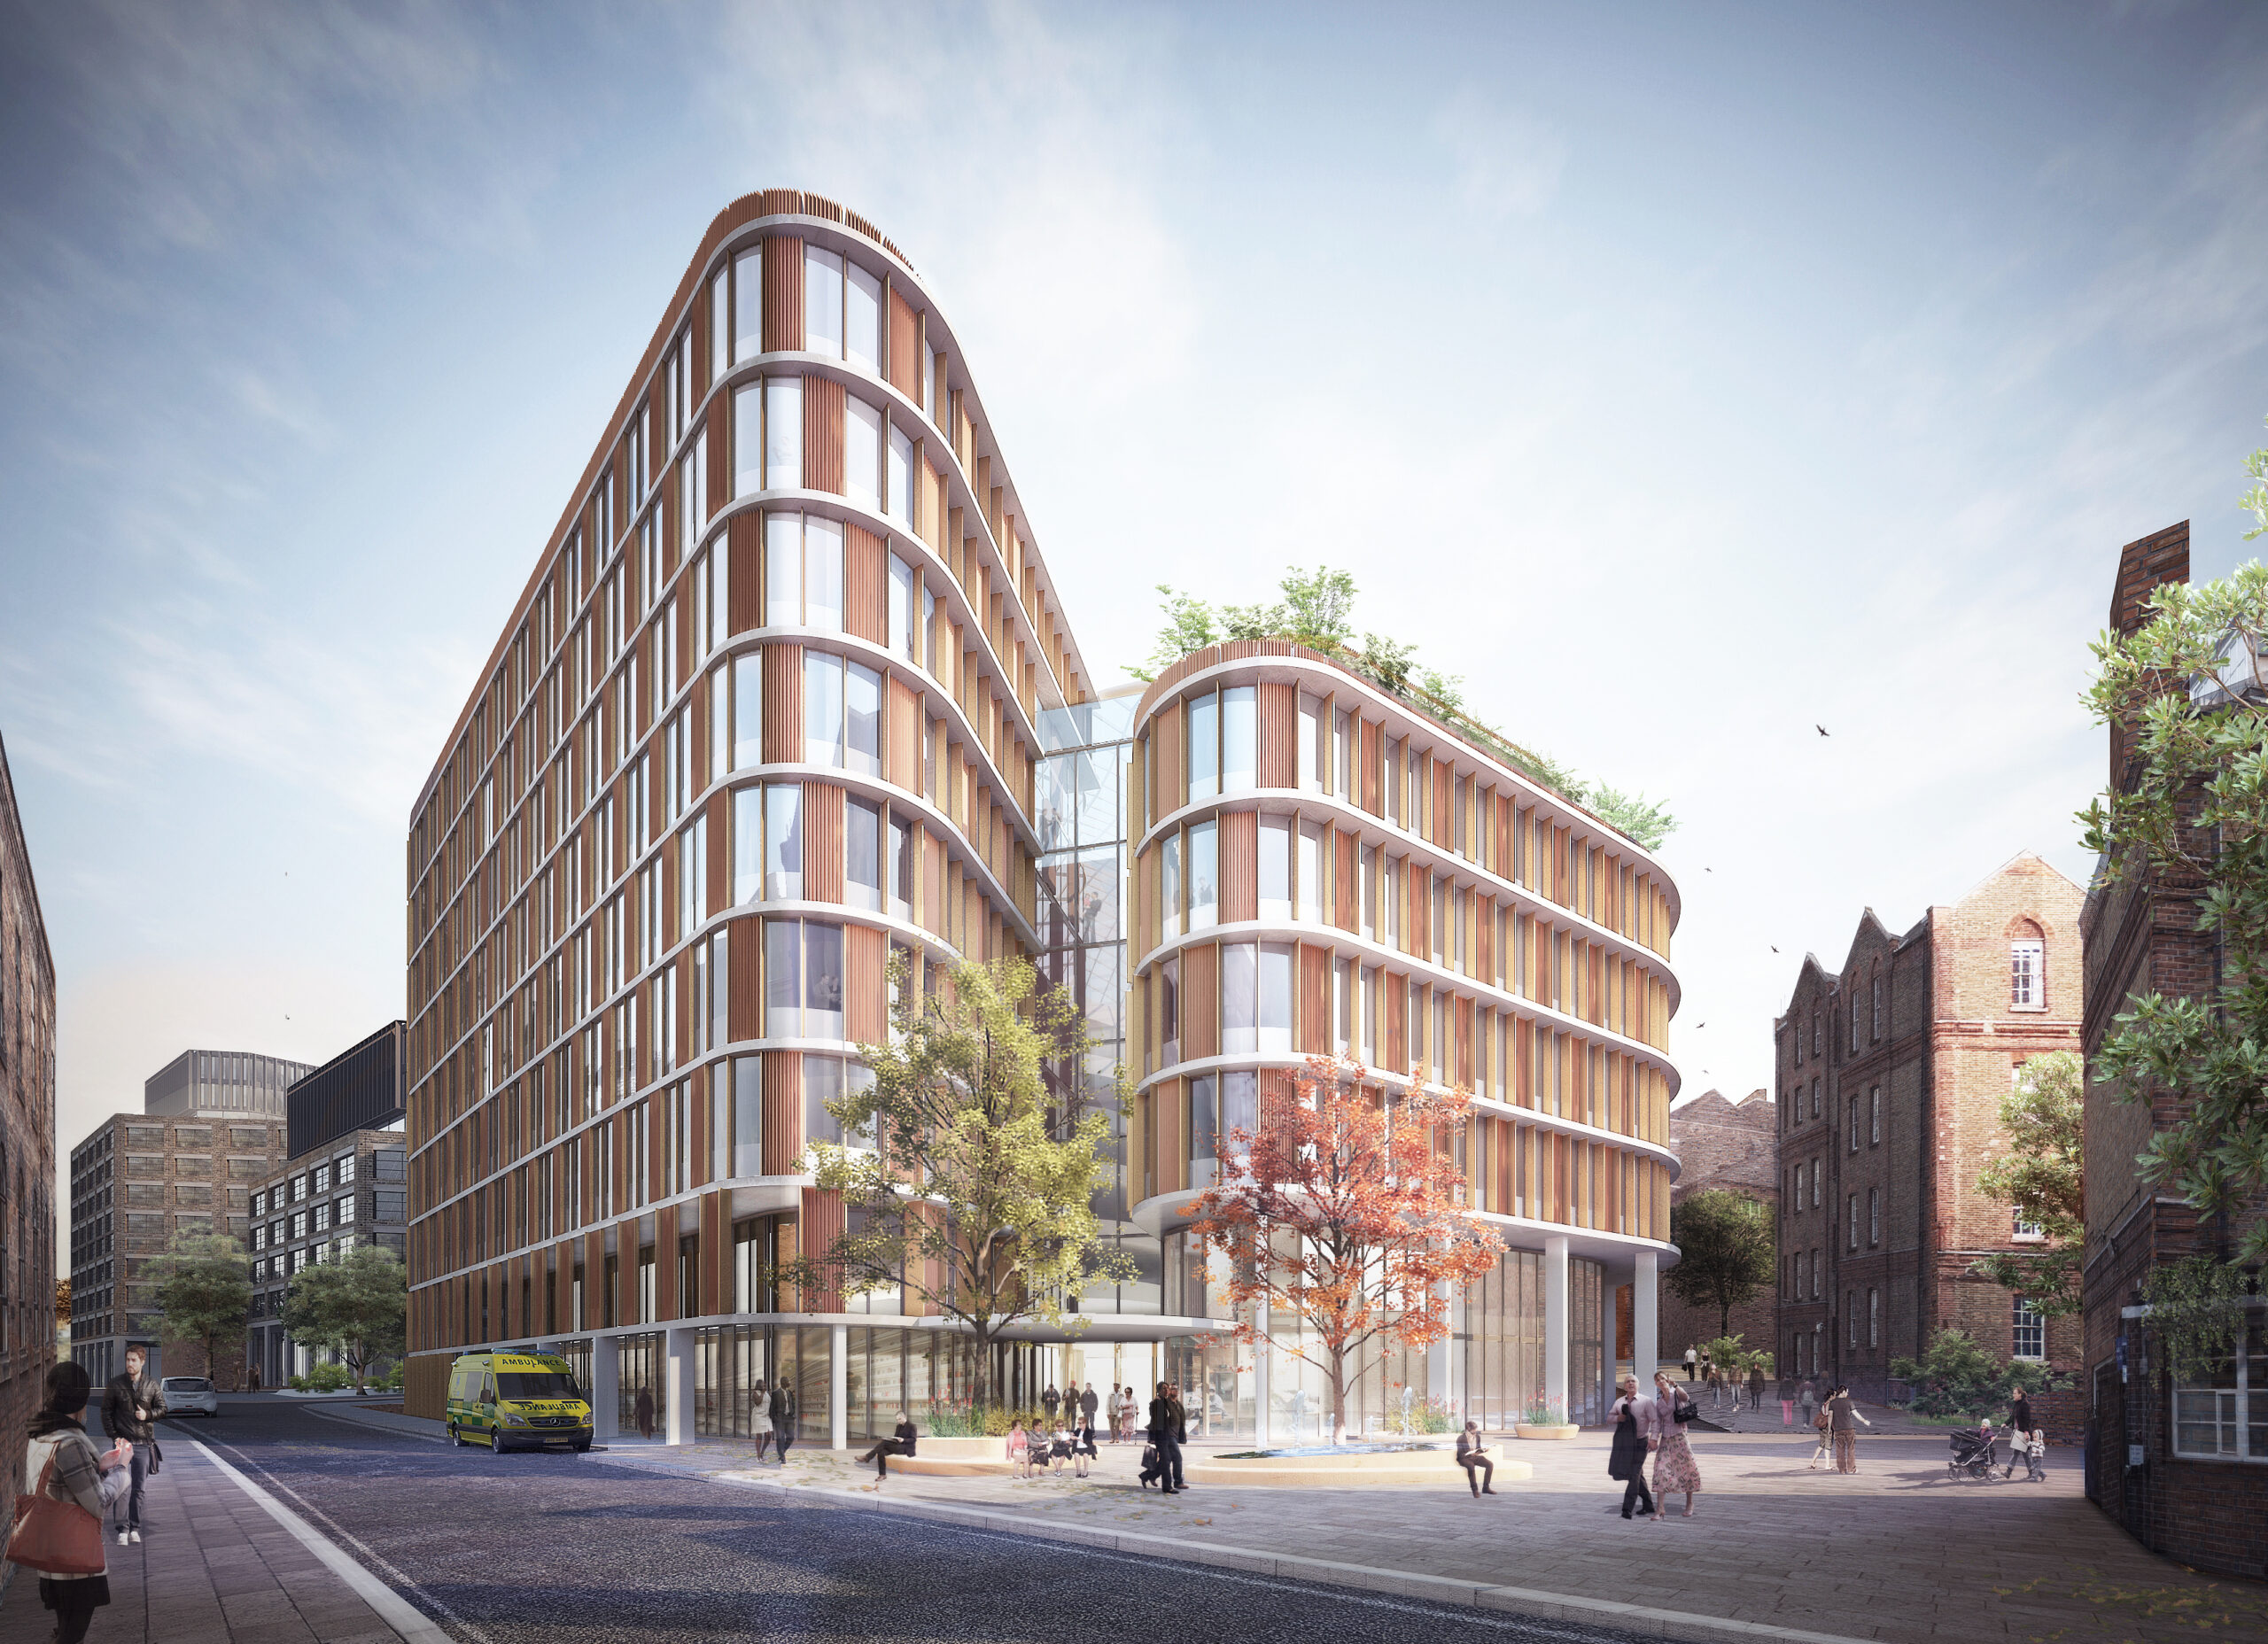 Proposals for a major new eye-care, research and educational facility at St Pancras Hospital in Camden, north London by Penoyre & Prasad and White Arkitekter